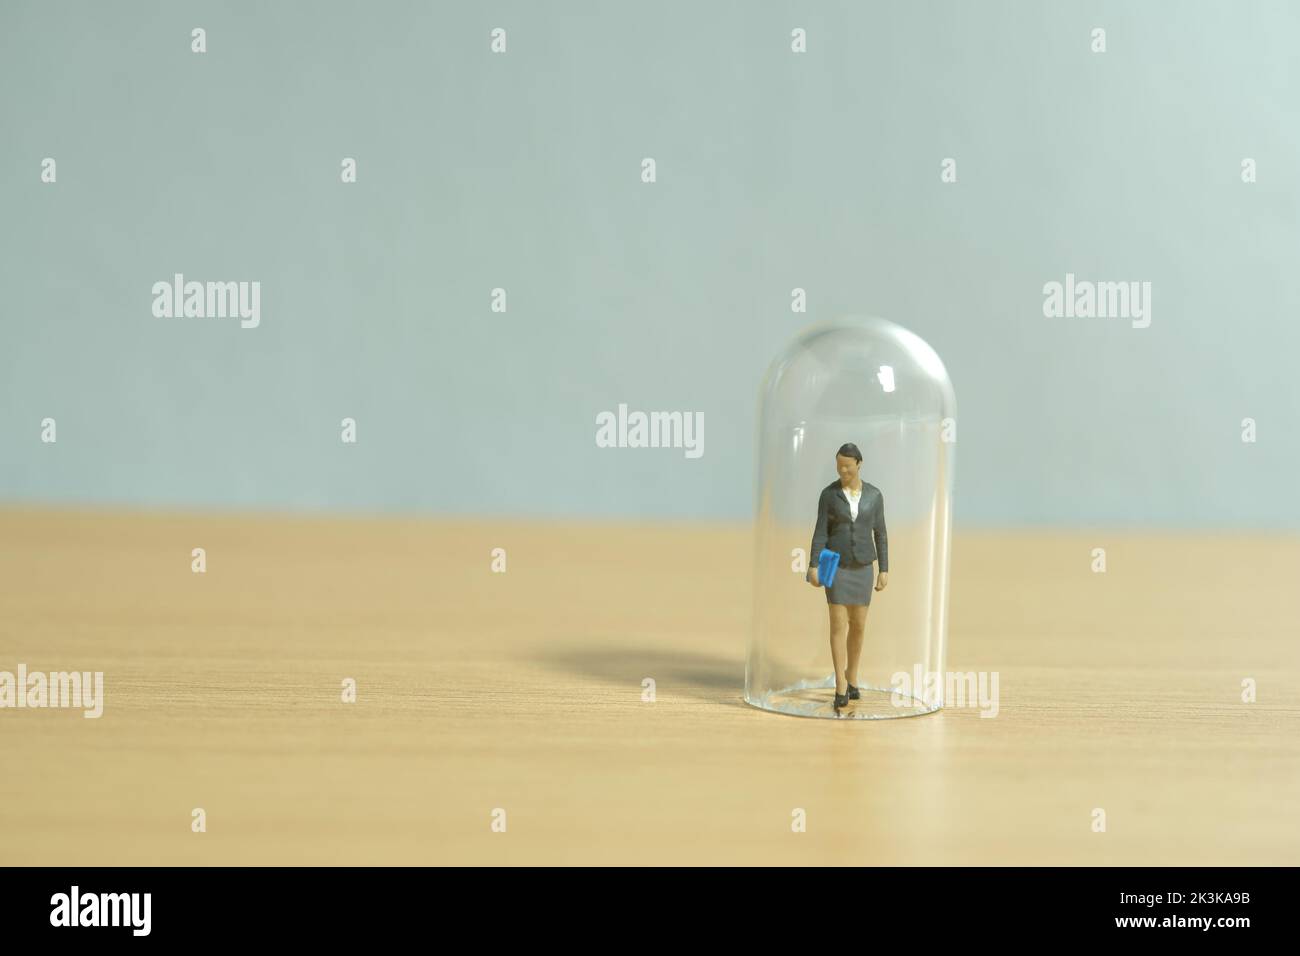 Miniature people toy figure photography. Women limitation concept. A businesswoman standing in the glass dome. Isolated on white background. Image pho Stock Photo